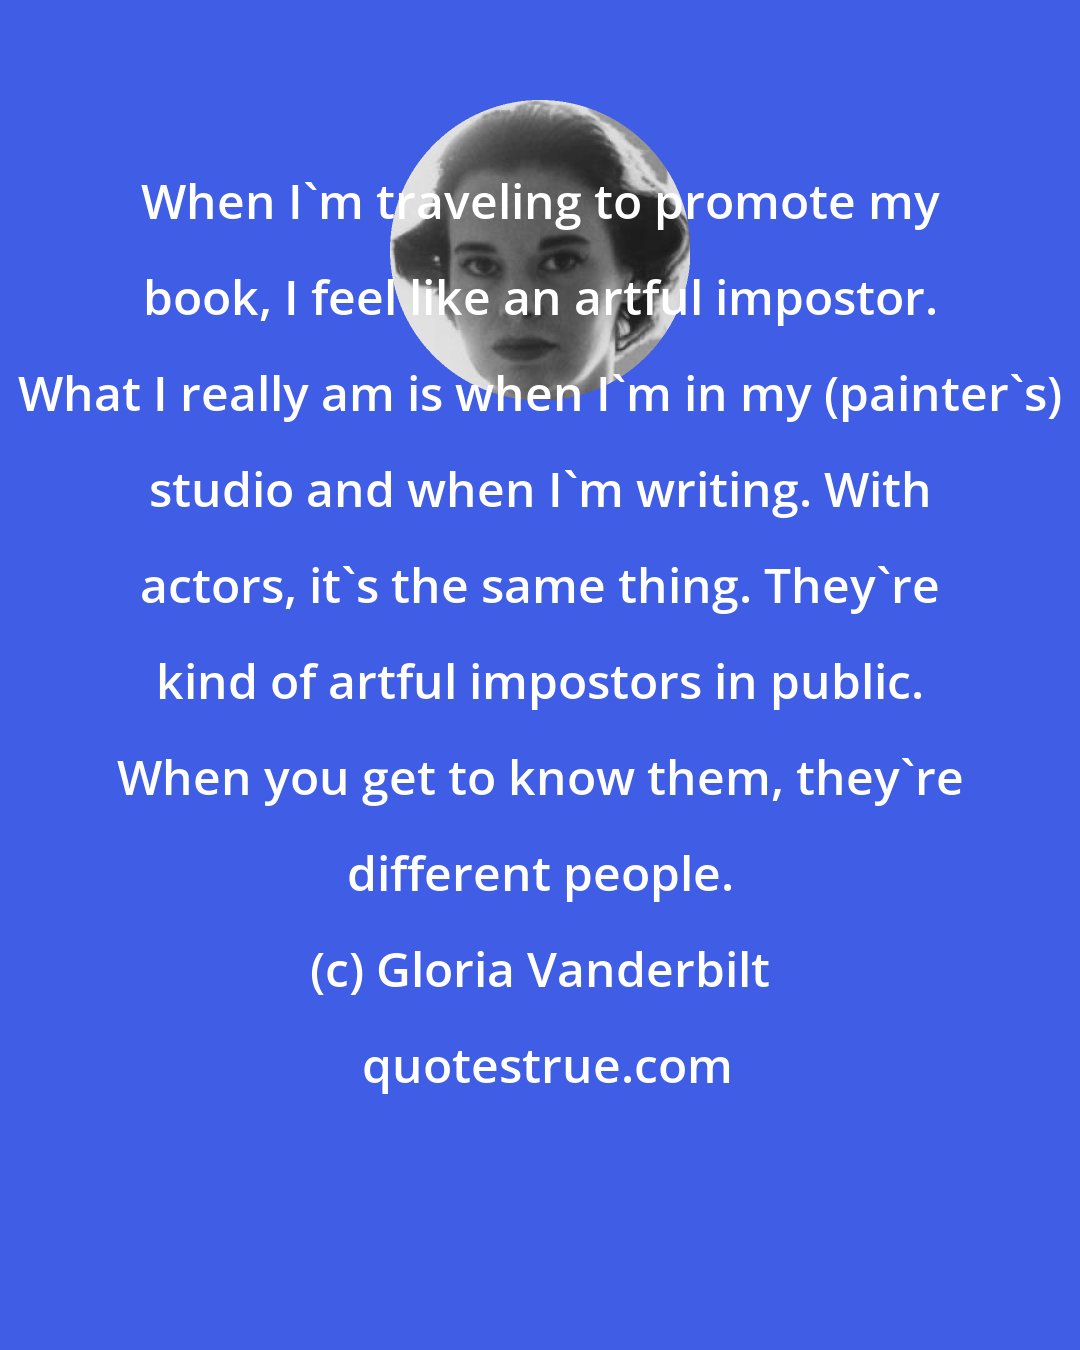 Gloria Vanderbilt: When I'm traveling to promote my book, I feel like an artful impostor. What I really am is when I'm in my (painter's) studio and when I'm writing. With actors, it's the same thing. They're kind of artful impostors in public. When you get to know them, they're different people.